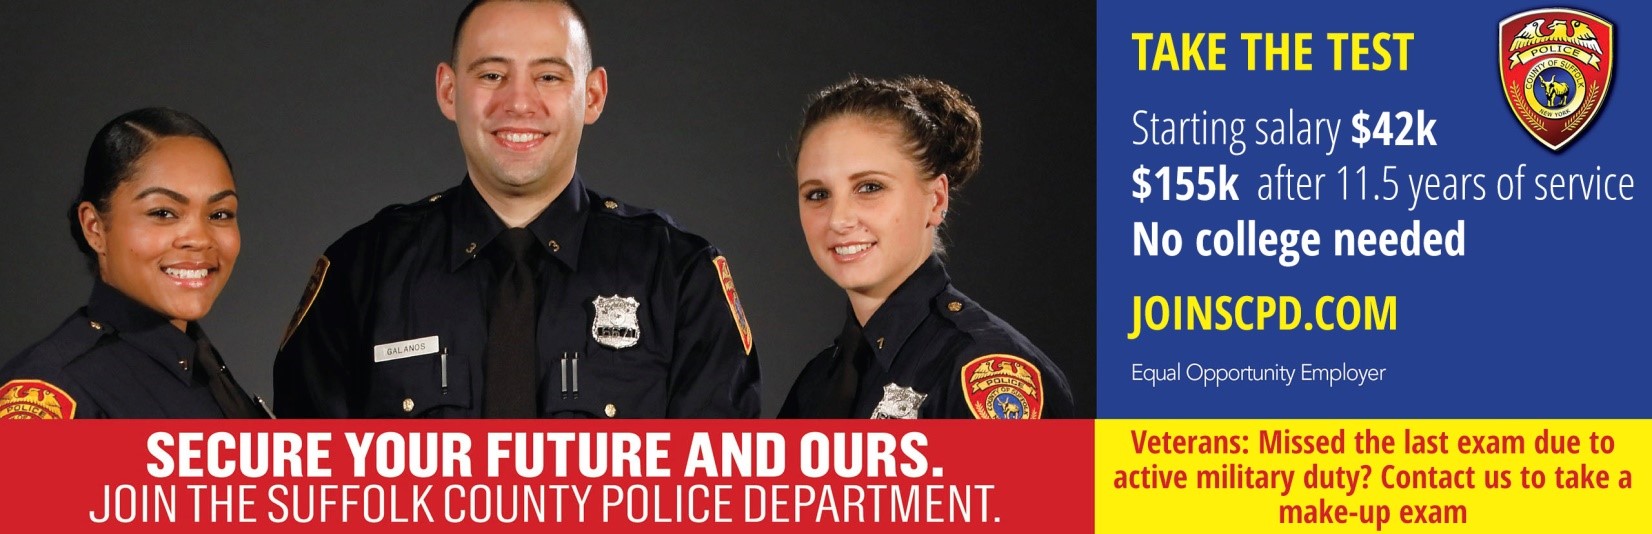 description of benefits from joining Suffolk County's Police Department